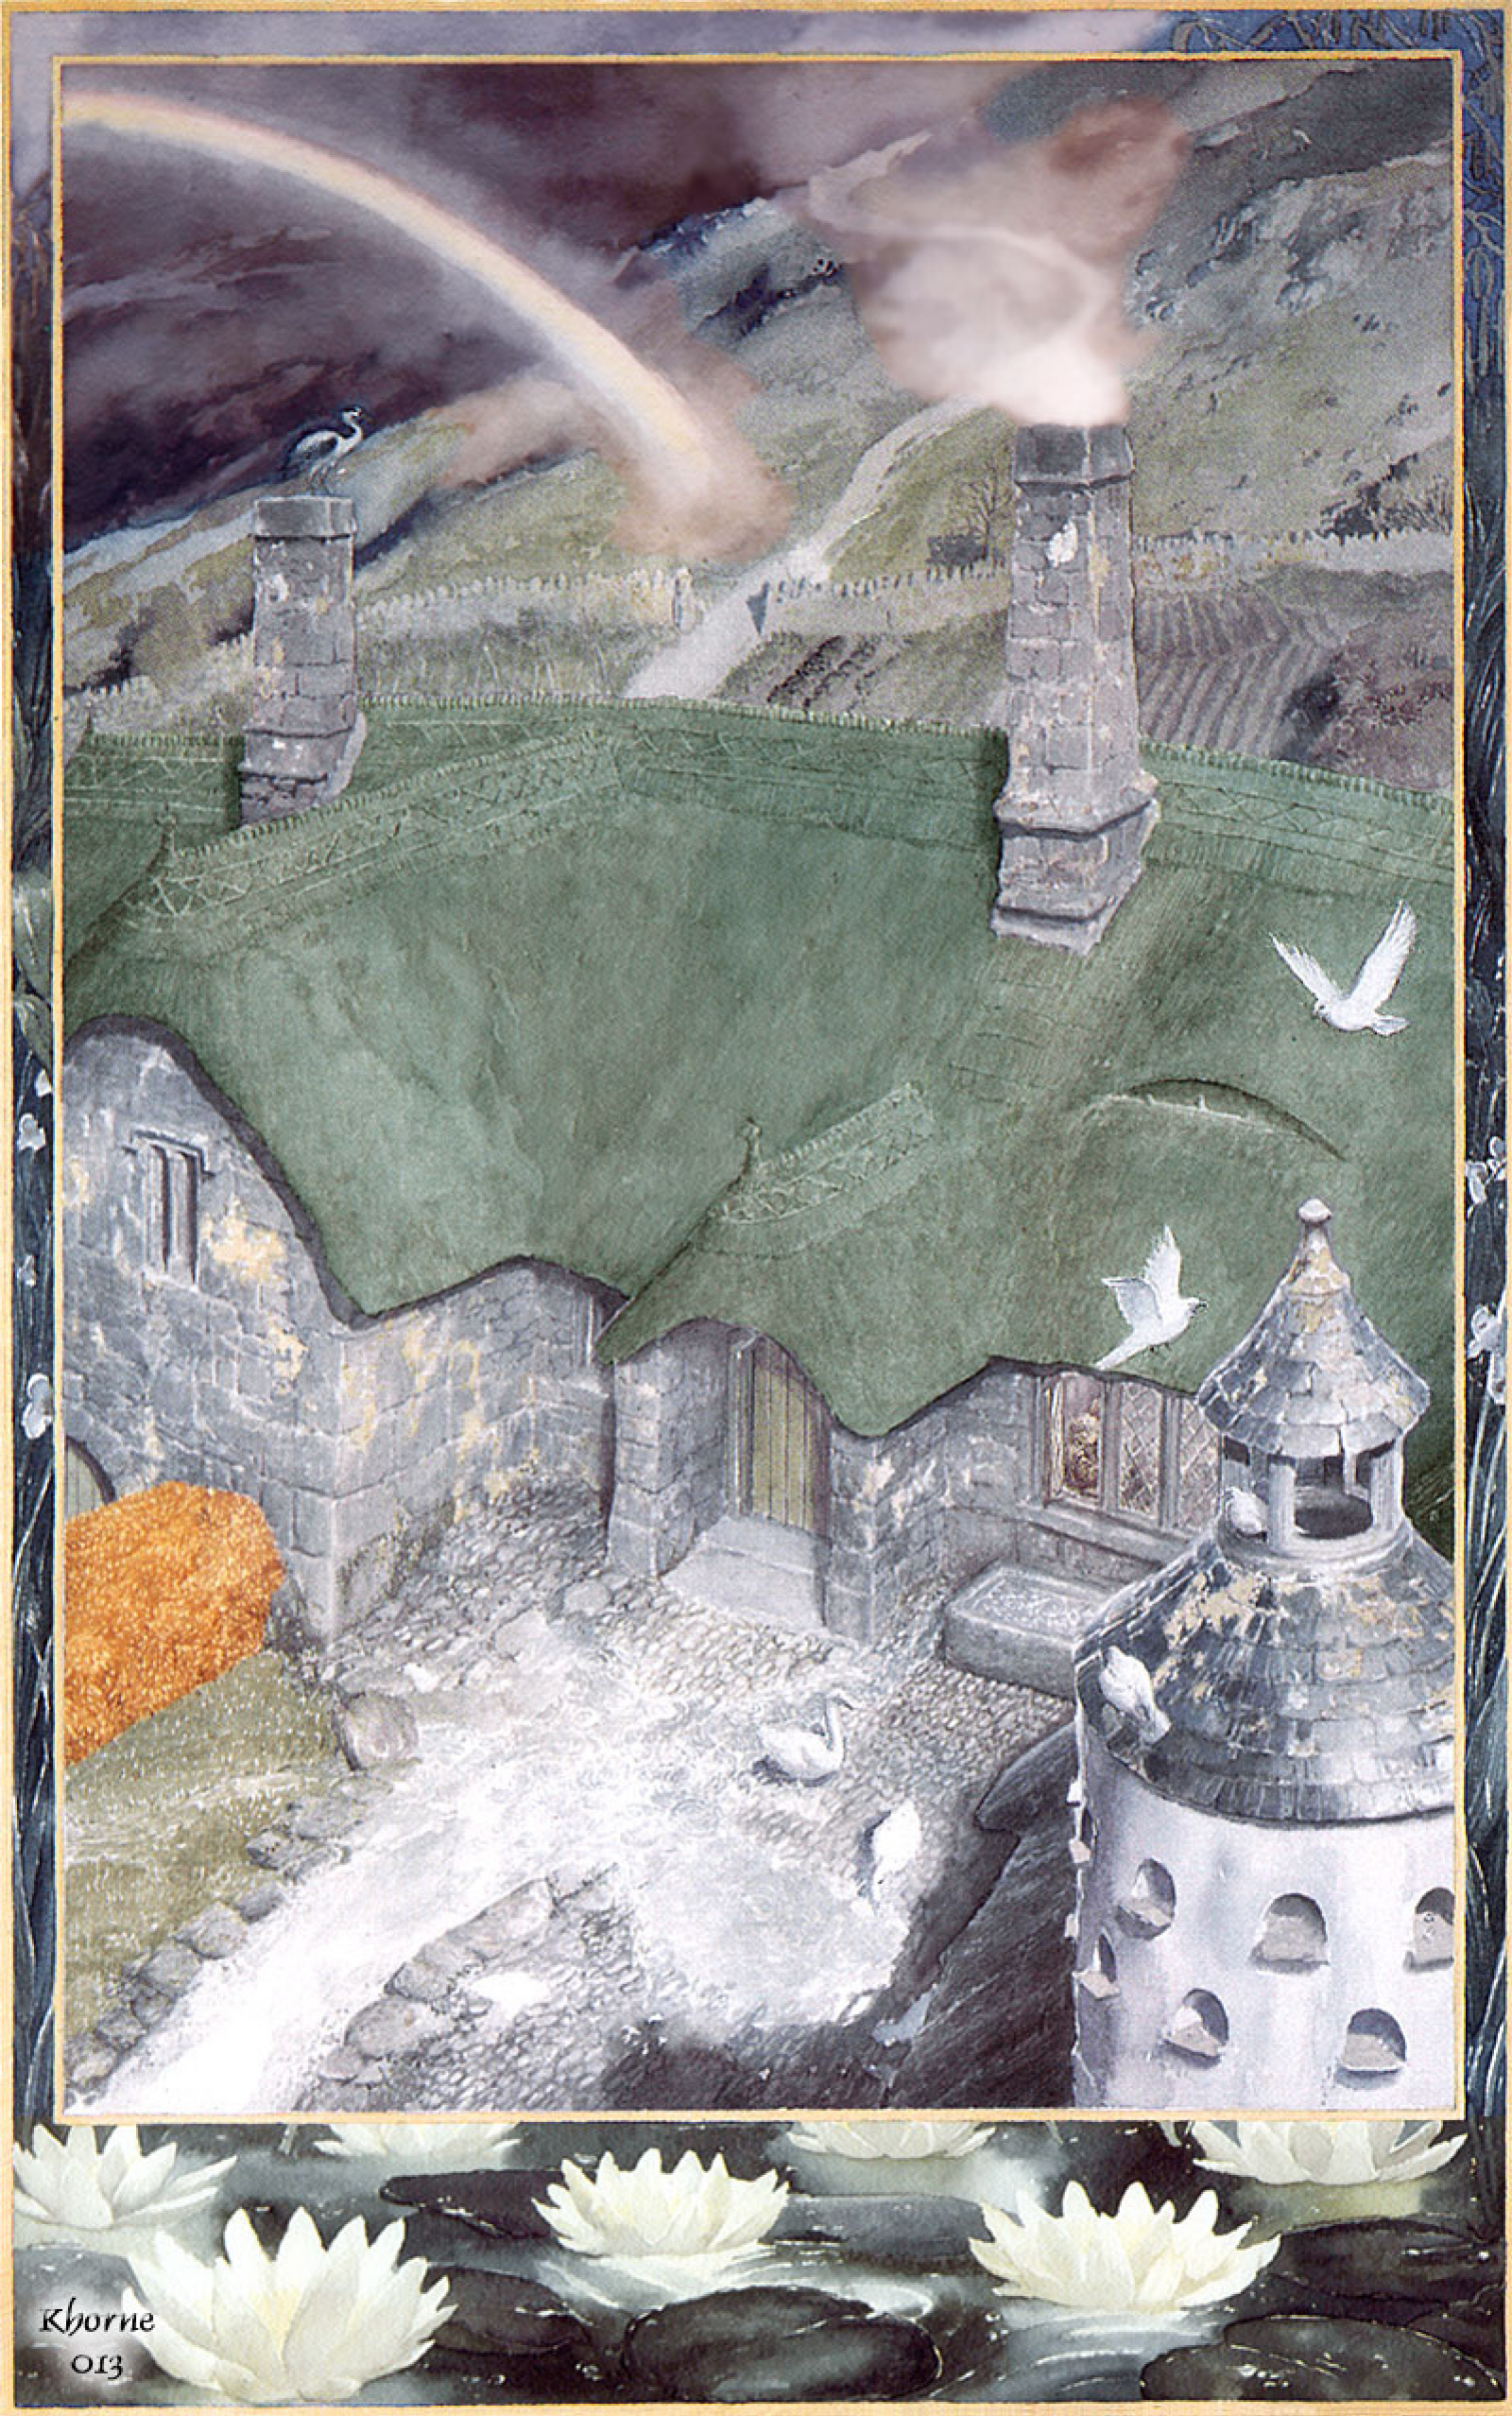 The Lord of the rings 31 by Alan Lee: History, Analysis & Facts | Arthive